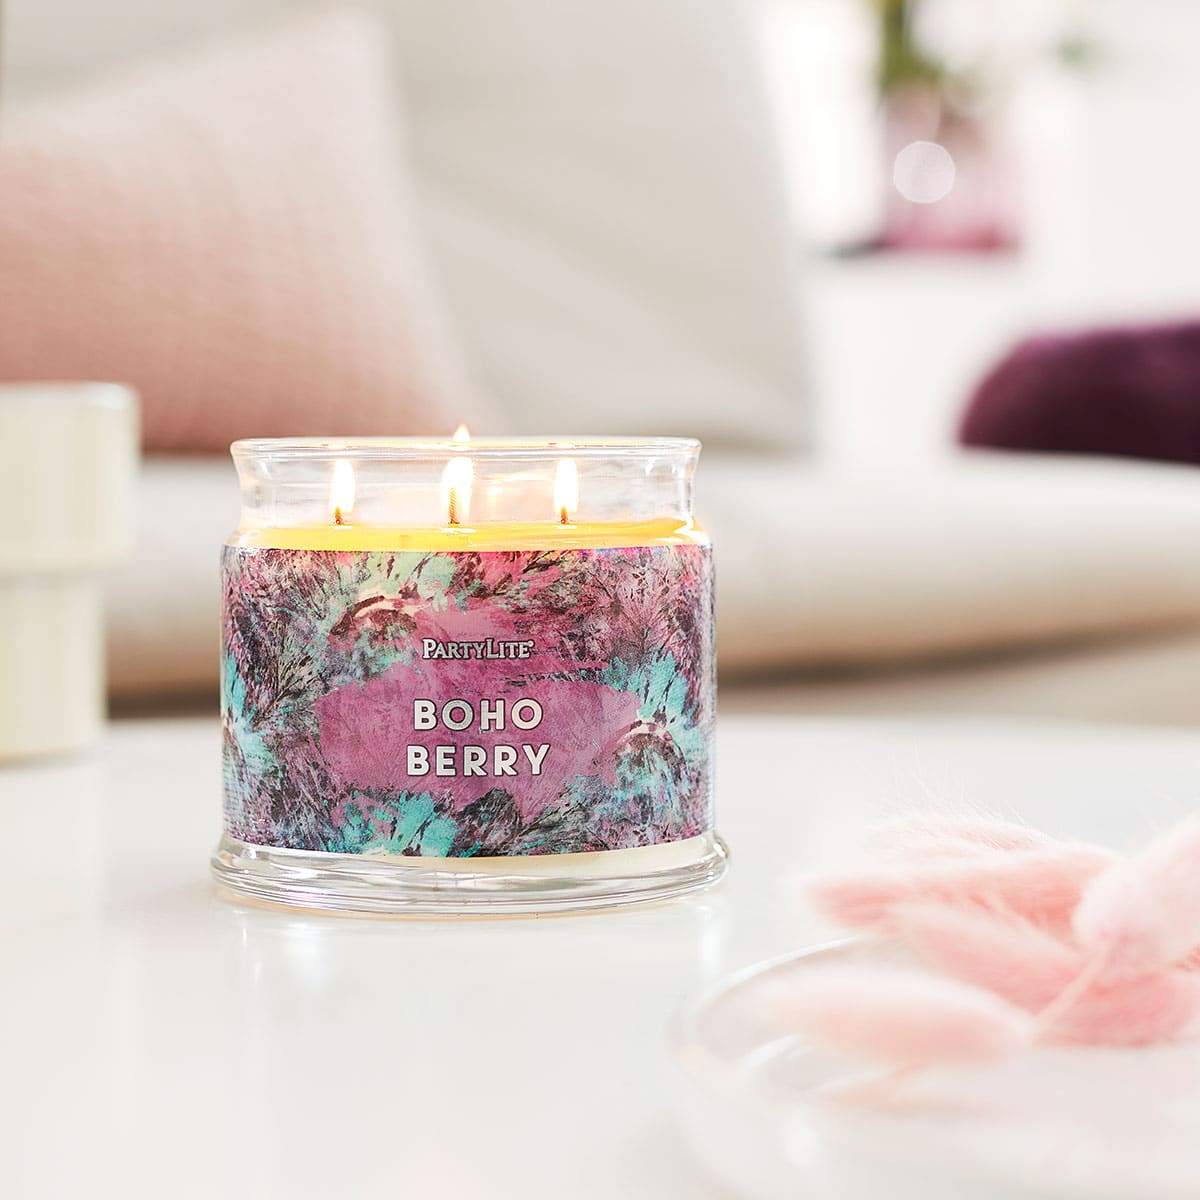 Boho Berry 3-wick Jar Candle - PartyLite US